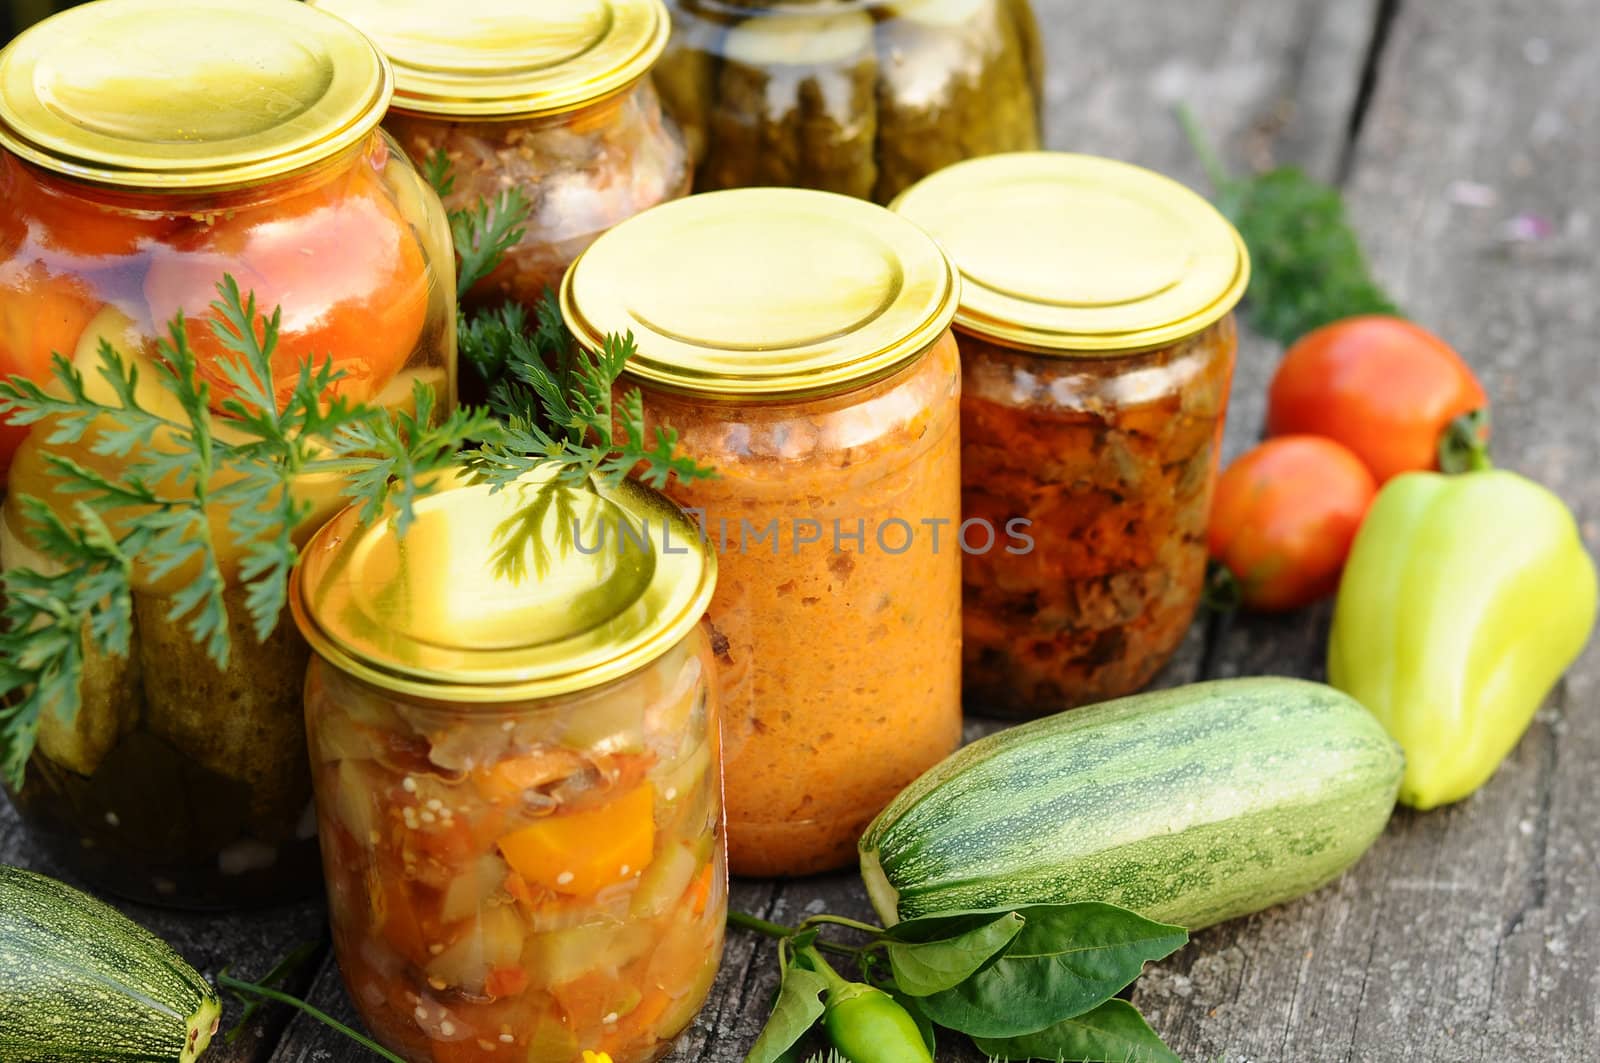 Home canning, canned vegetables